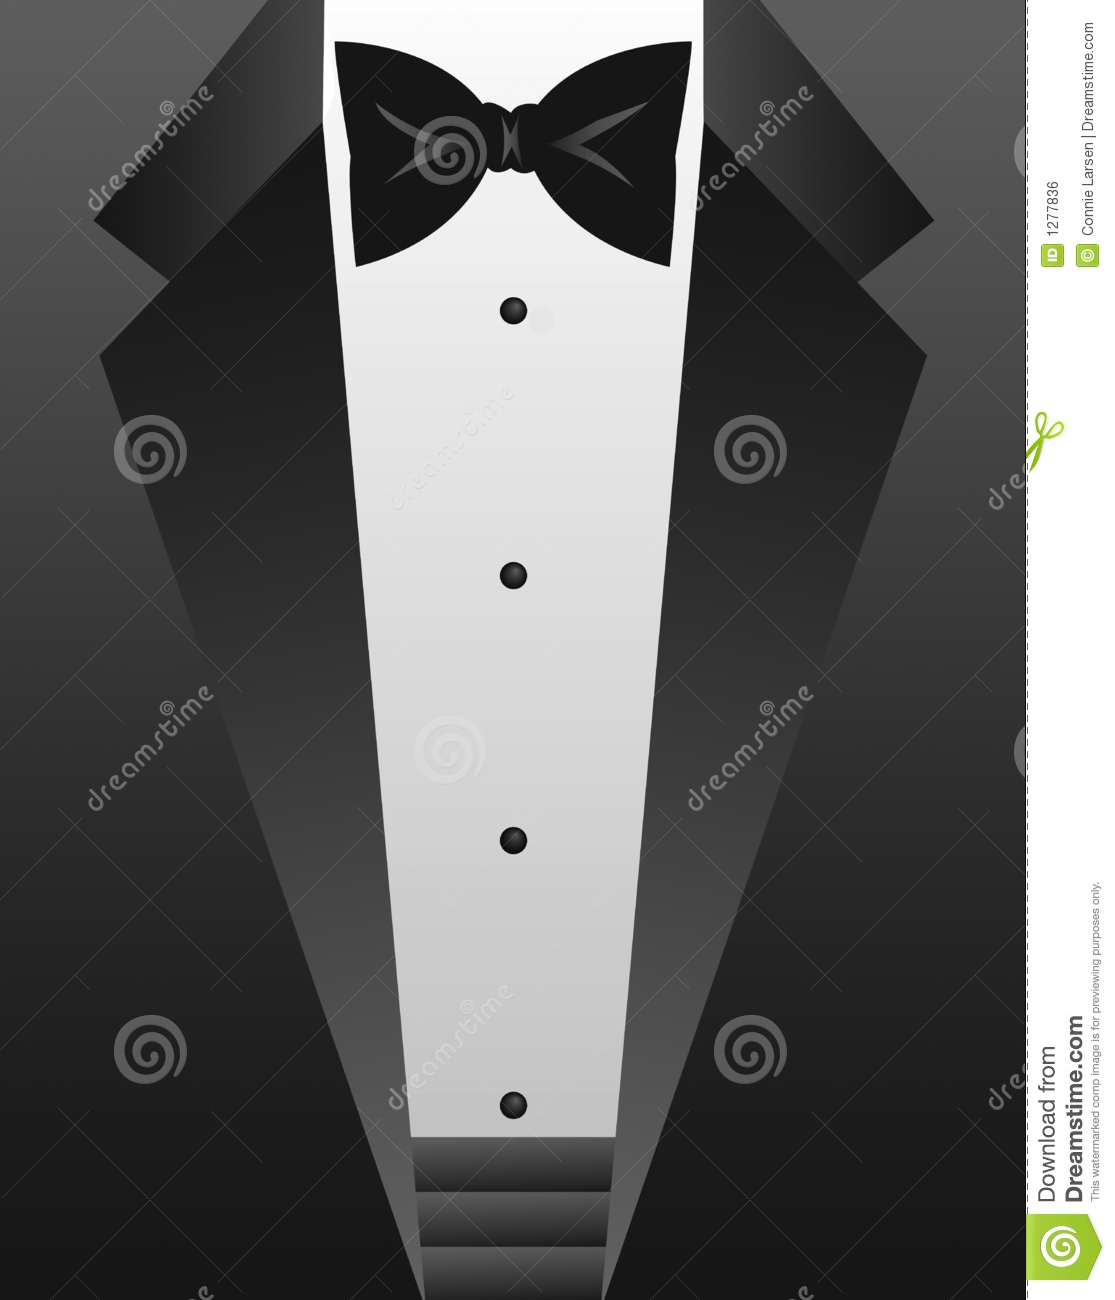 Formal Attire Black Bow Tie And Tuxedo Jacket   Eps File Available